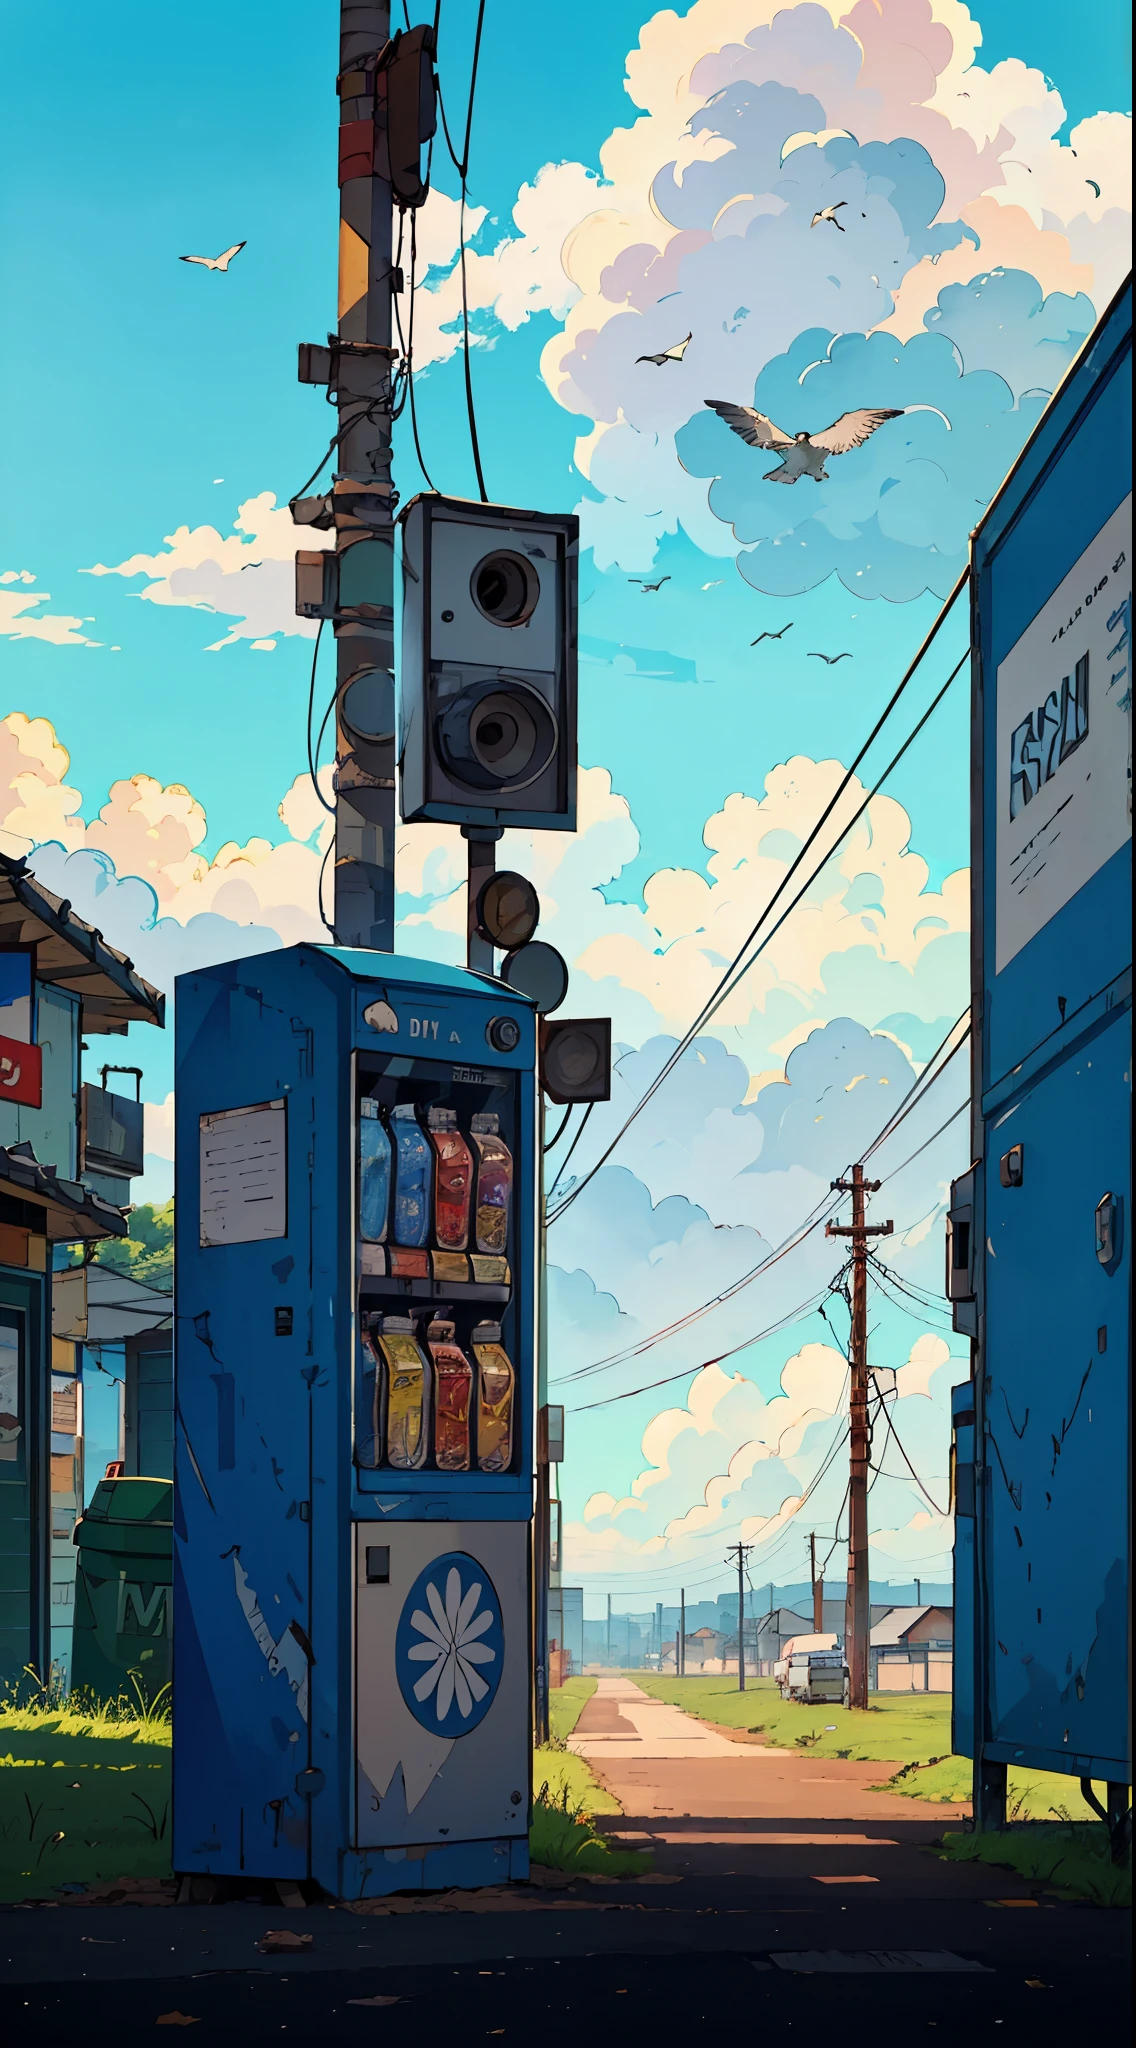 Vending machine at a distance on roadside with Dustbin, telephone poles, cloudy sky, birds, cars in background, wide angle shot, highly detailed, highly sharpened